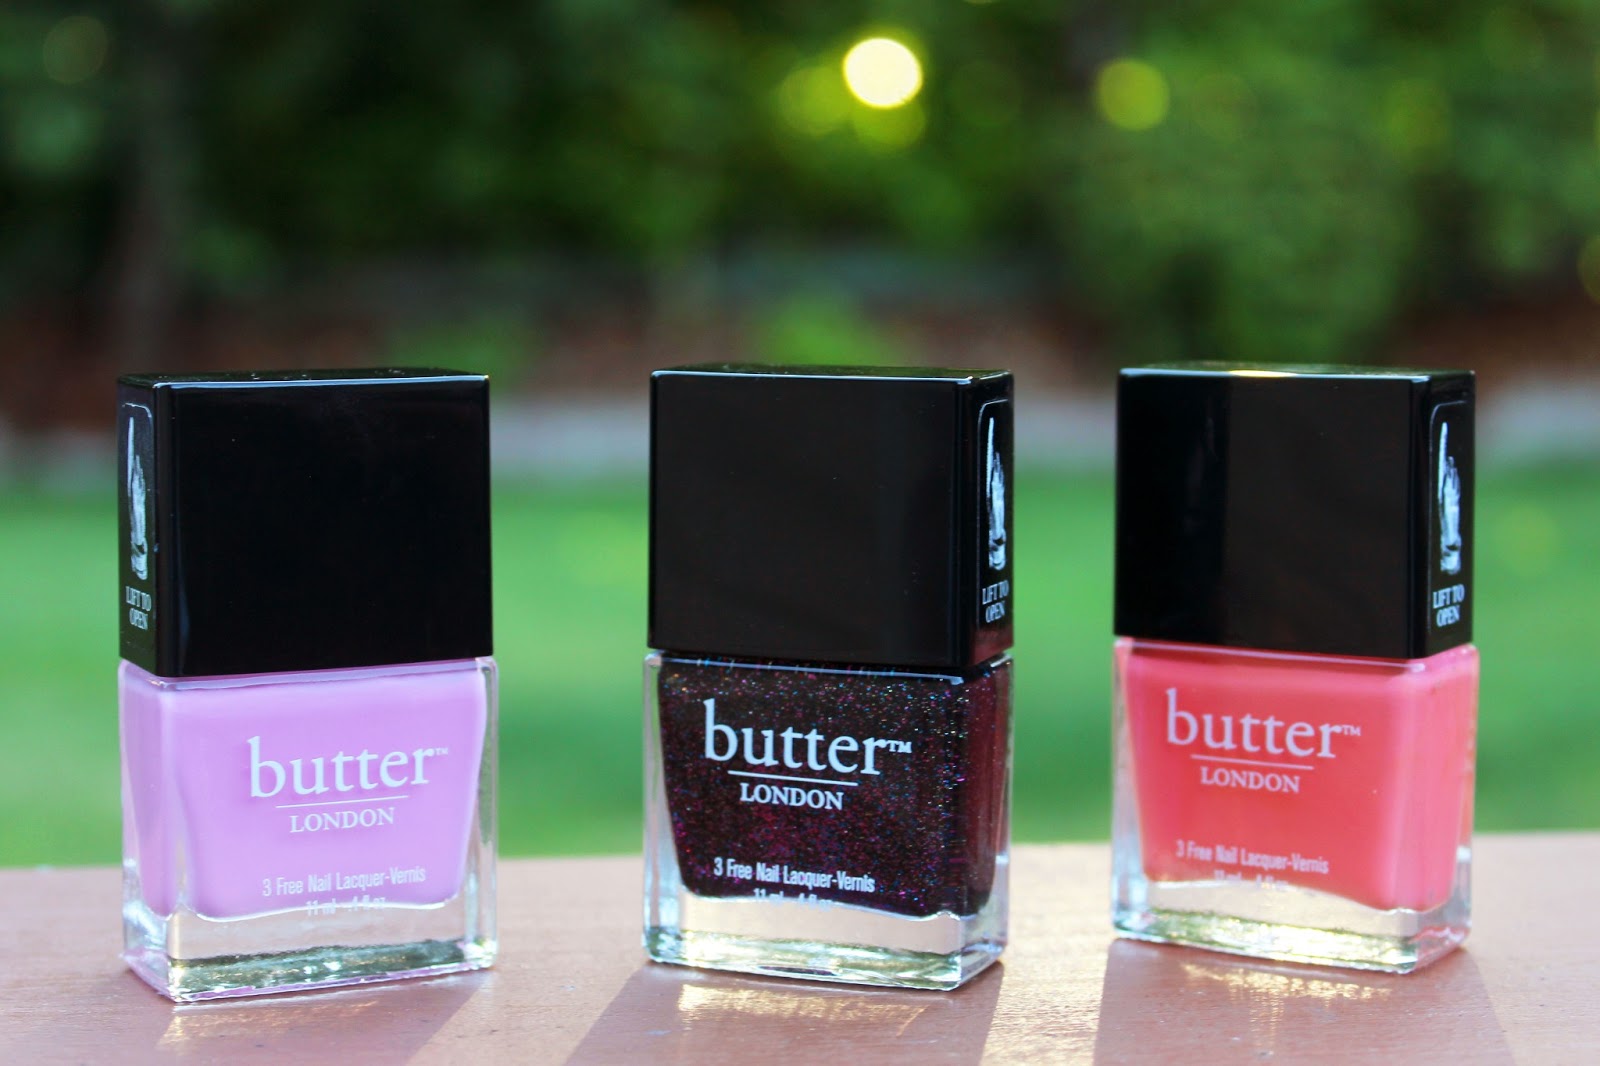 7. Butter London Nail Lacquer in "Teddy Girl" - wide 2